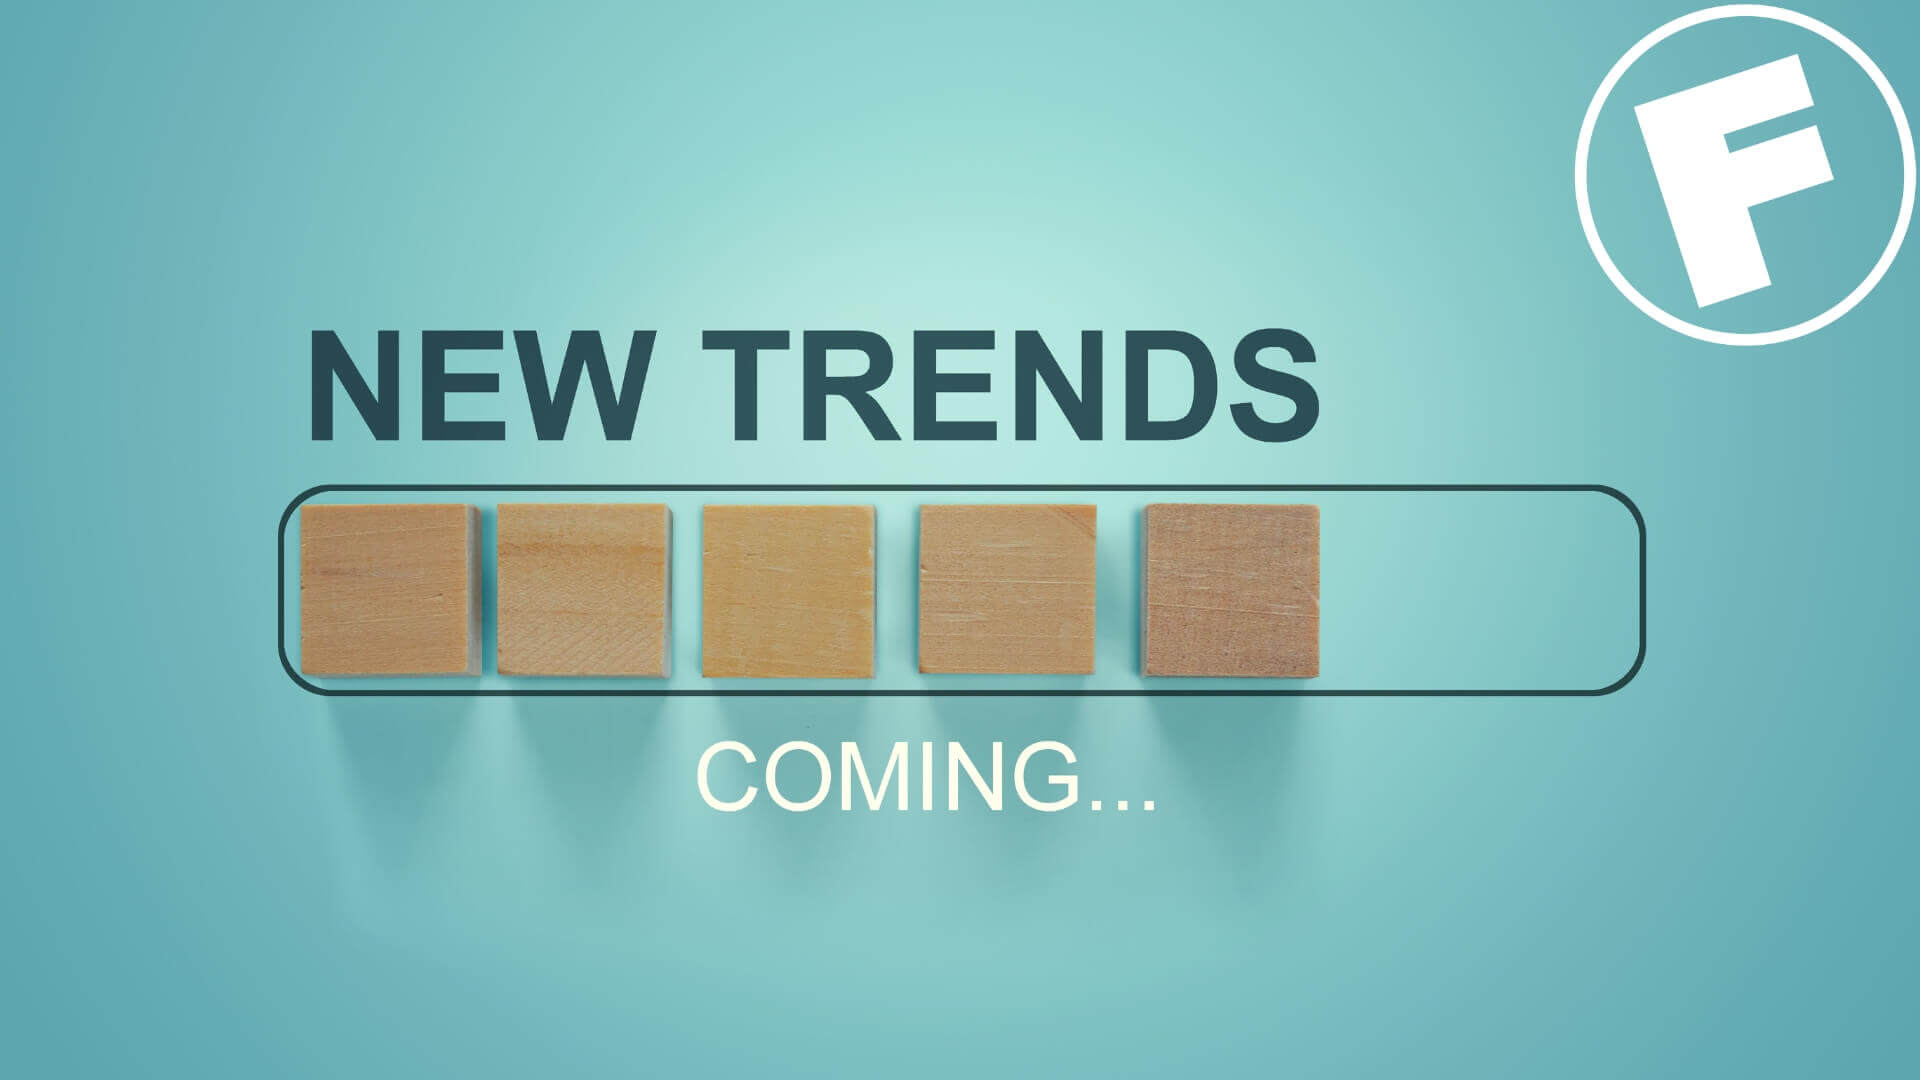 the upcoming trends in franchising this year